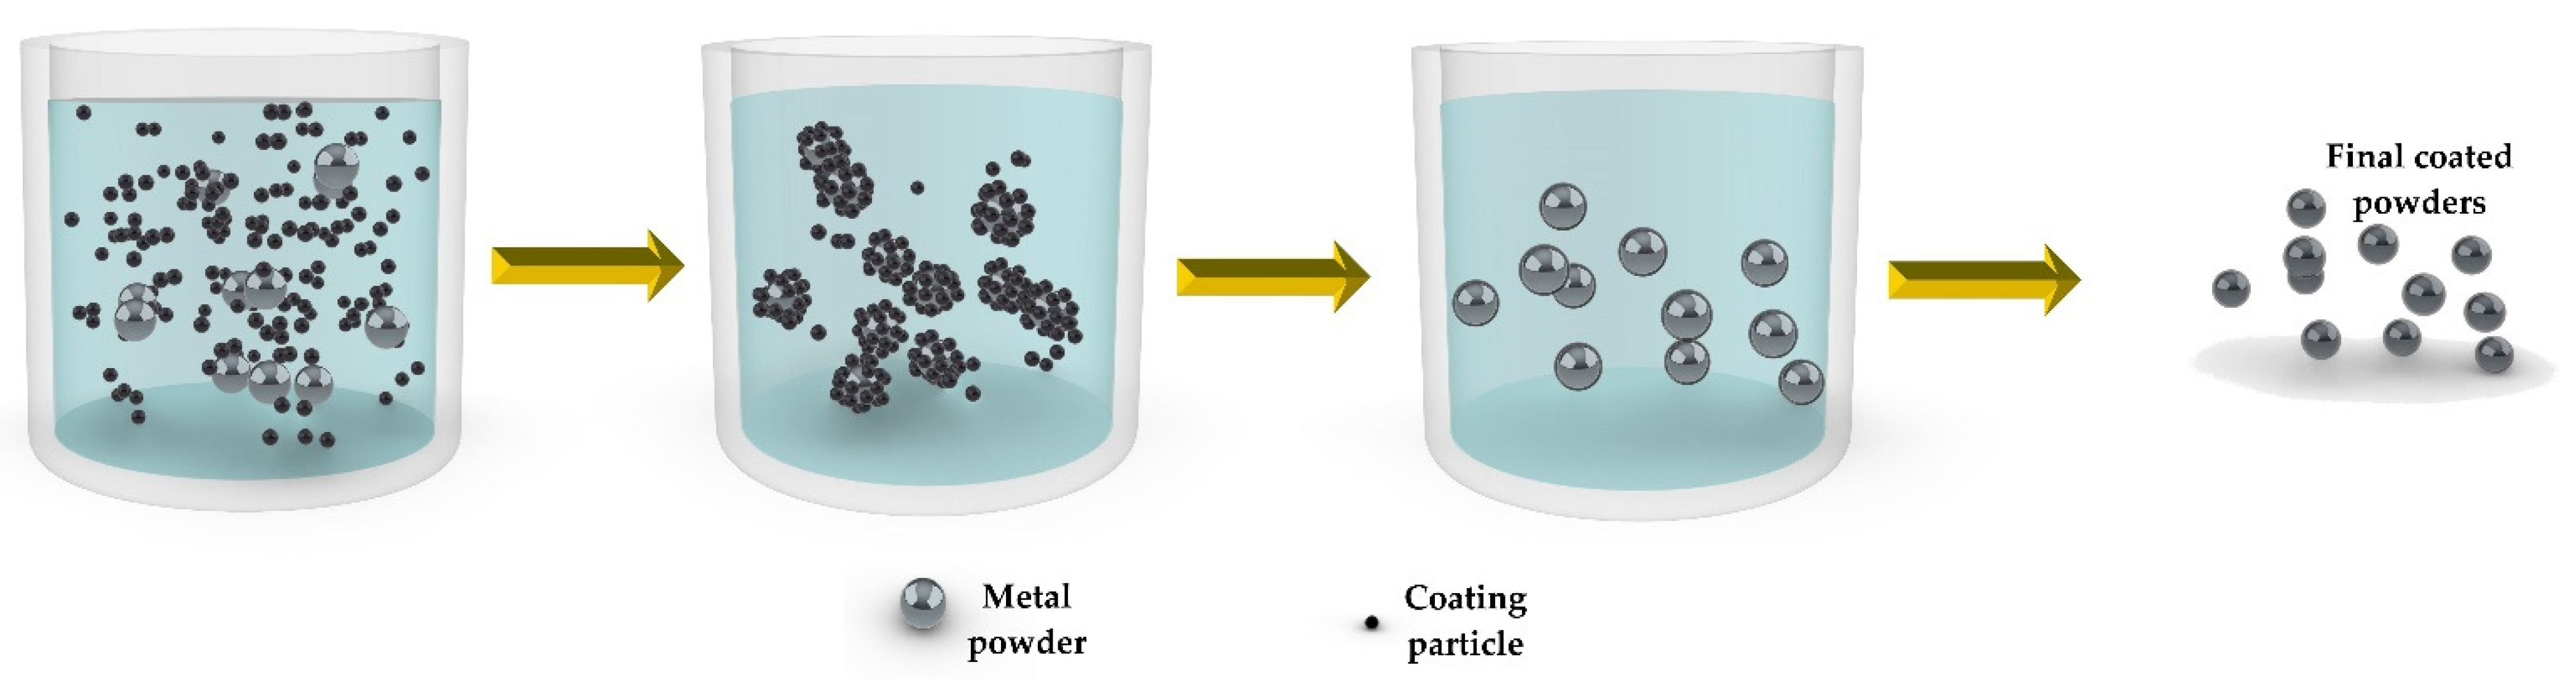 Metals | Free Full-Text | Coated Metal Powders for Laser Powder Bed Fusion  (L-PBF) Processing: A Review | HTML